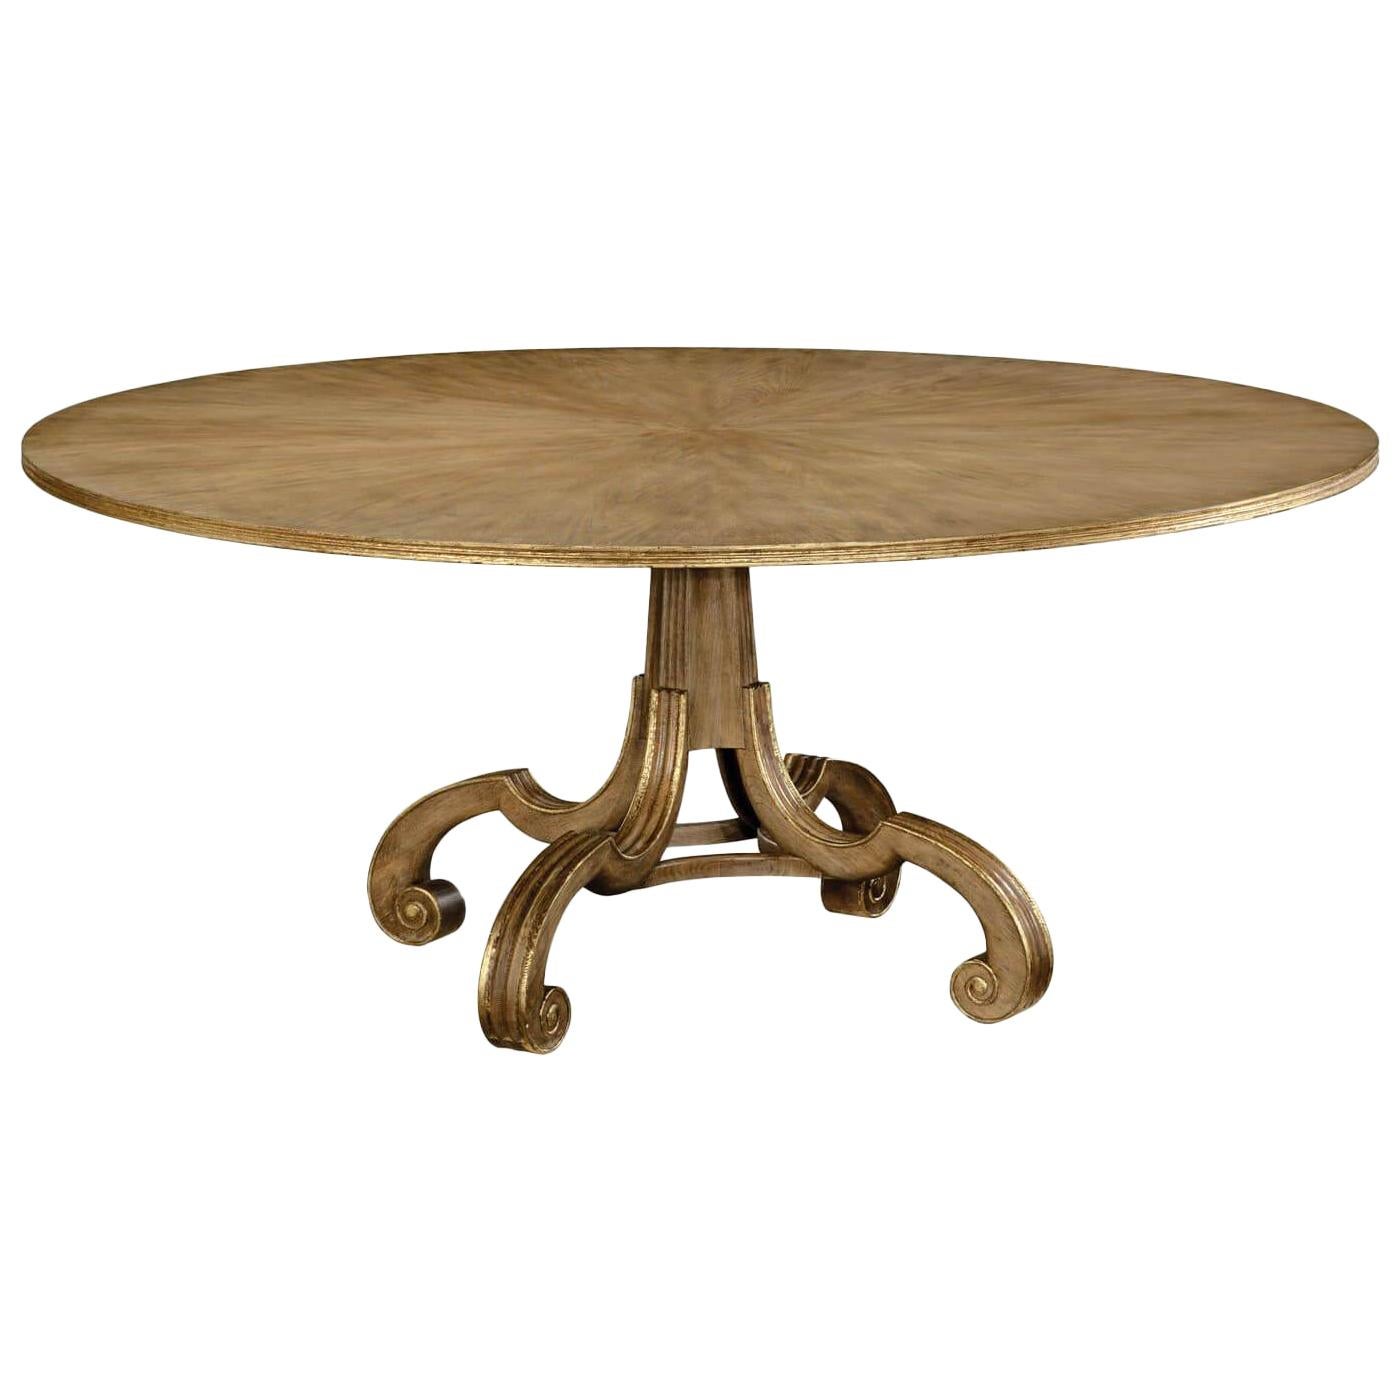 English Round Oak Dining Table For Sale